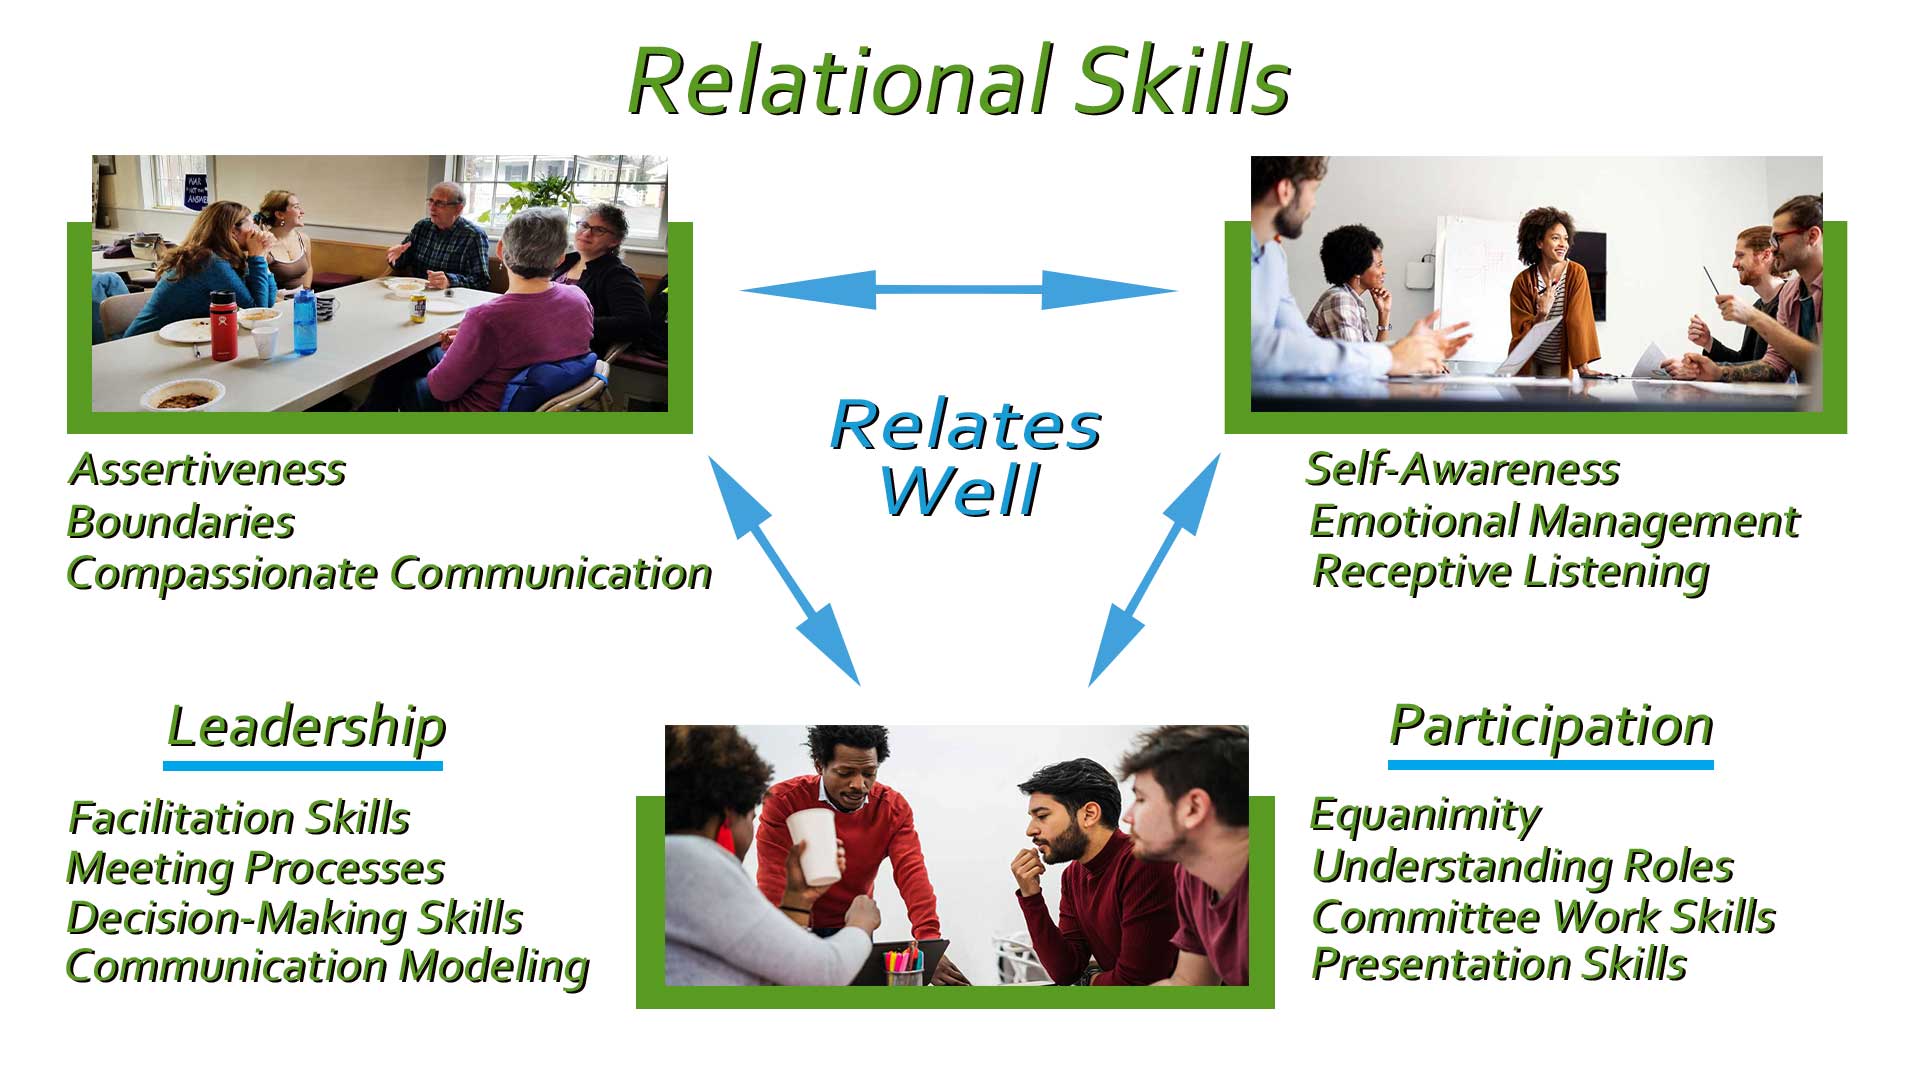 relational, procedural and leadership skills graphic